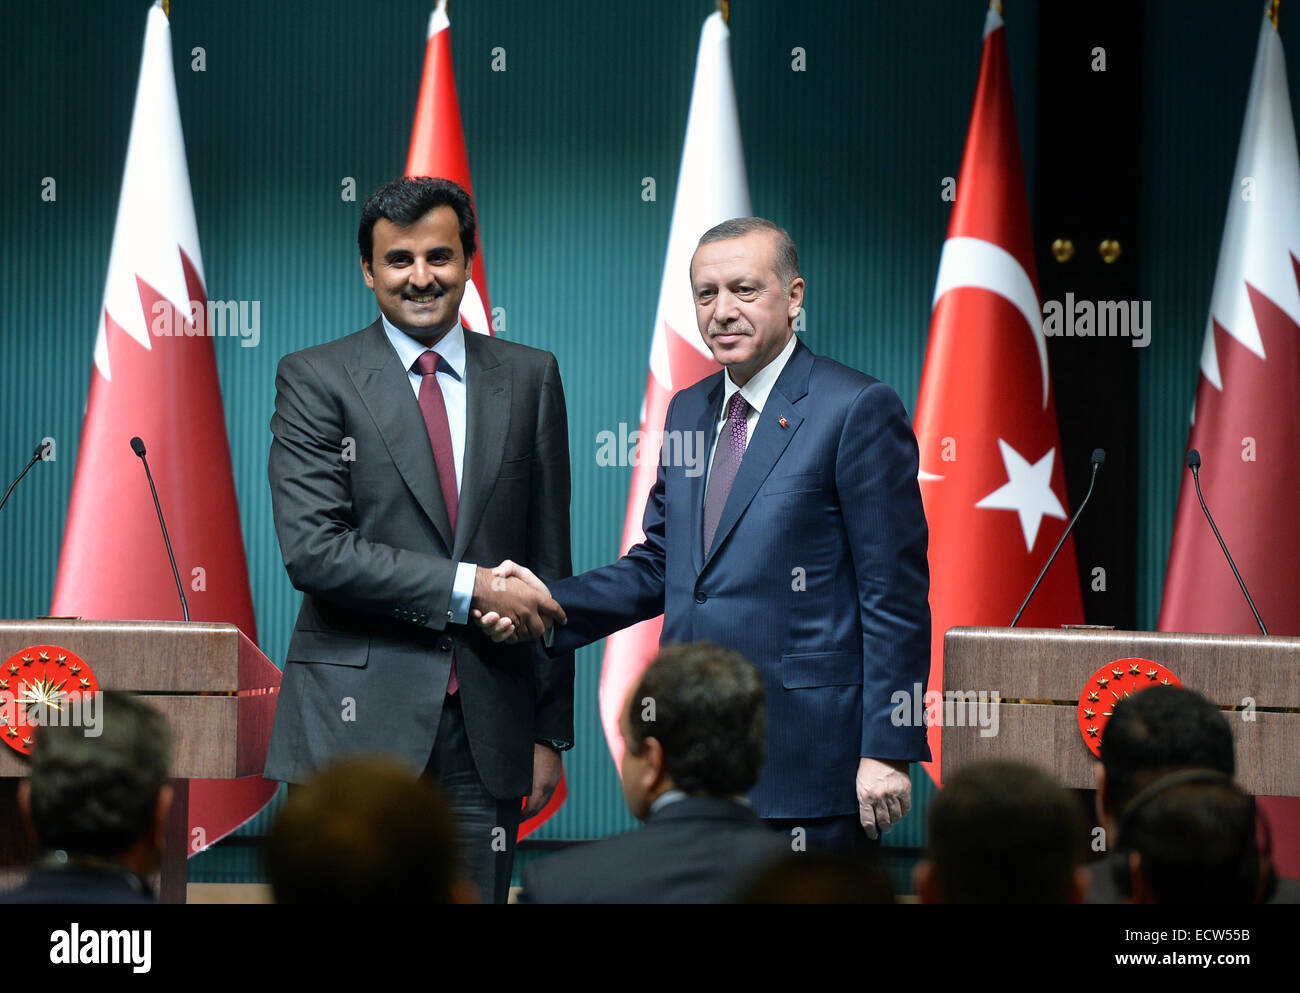 Ankara, Turkey. 19th Dec, 2014. Turkish President Recep Tayyp Erdogan (R) and visiting Qatar's Emir Sheikh Tamim bin Hamad Al Thani hold a joint press conference in the new Turkish Presidential Palace in Ankara, Turkey, on Dec. 19, 2014. Turkey and Qatar on Friday signed an agreement for the establishment of 'Strategic Committee' in order to intensify their already growing relations. Credit:  Mustafa Kaya/Xinhua/Alamy Live News Stock Photo